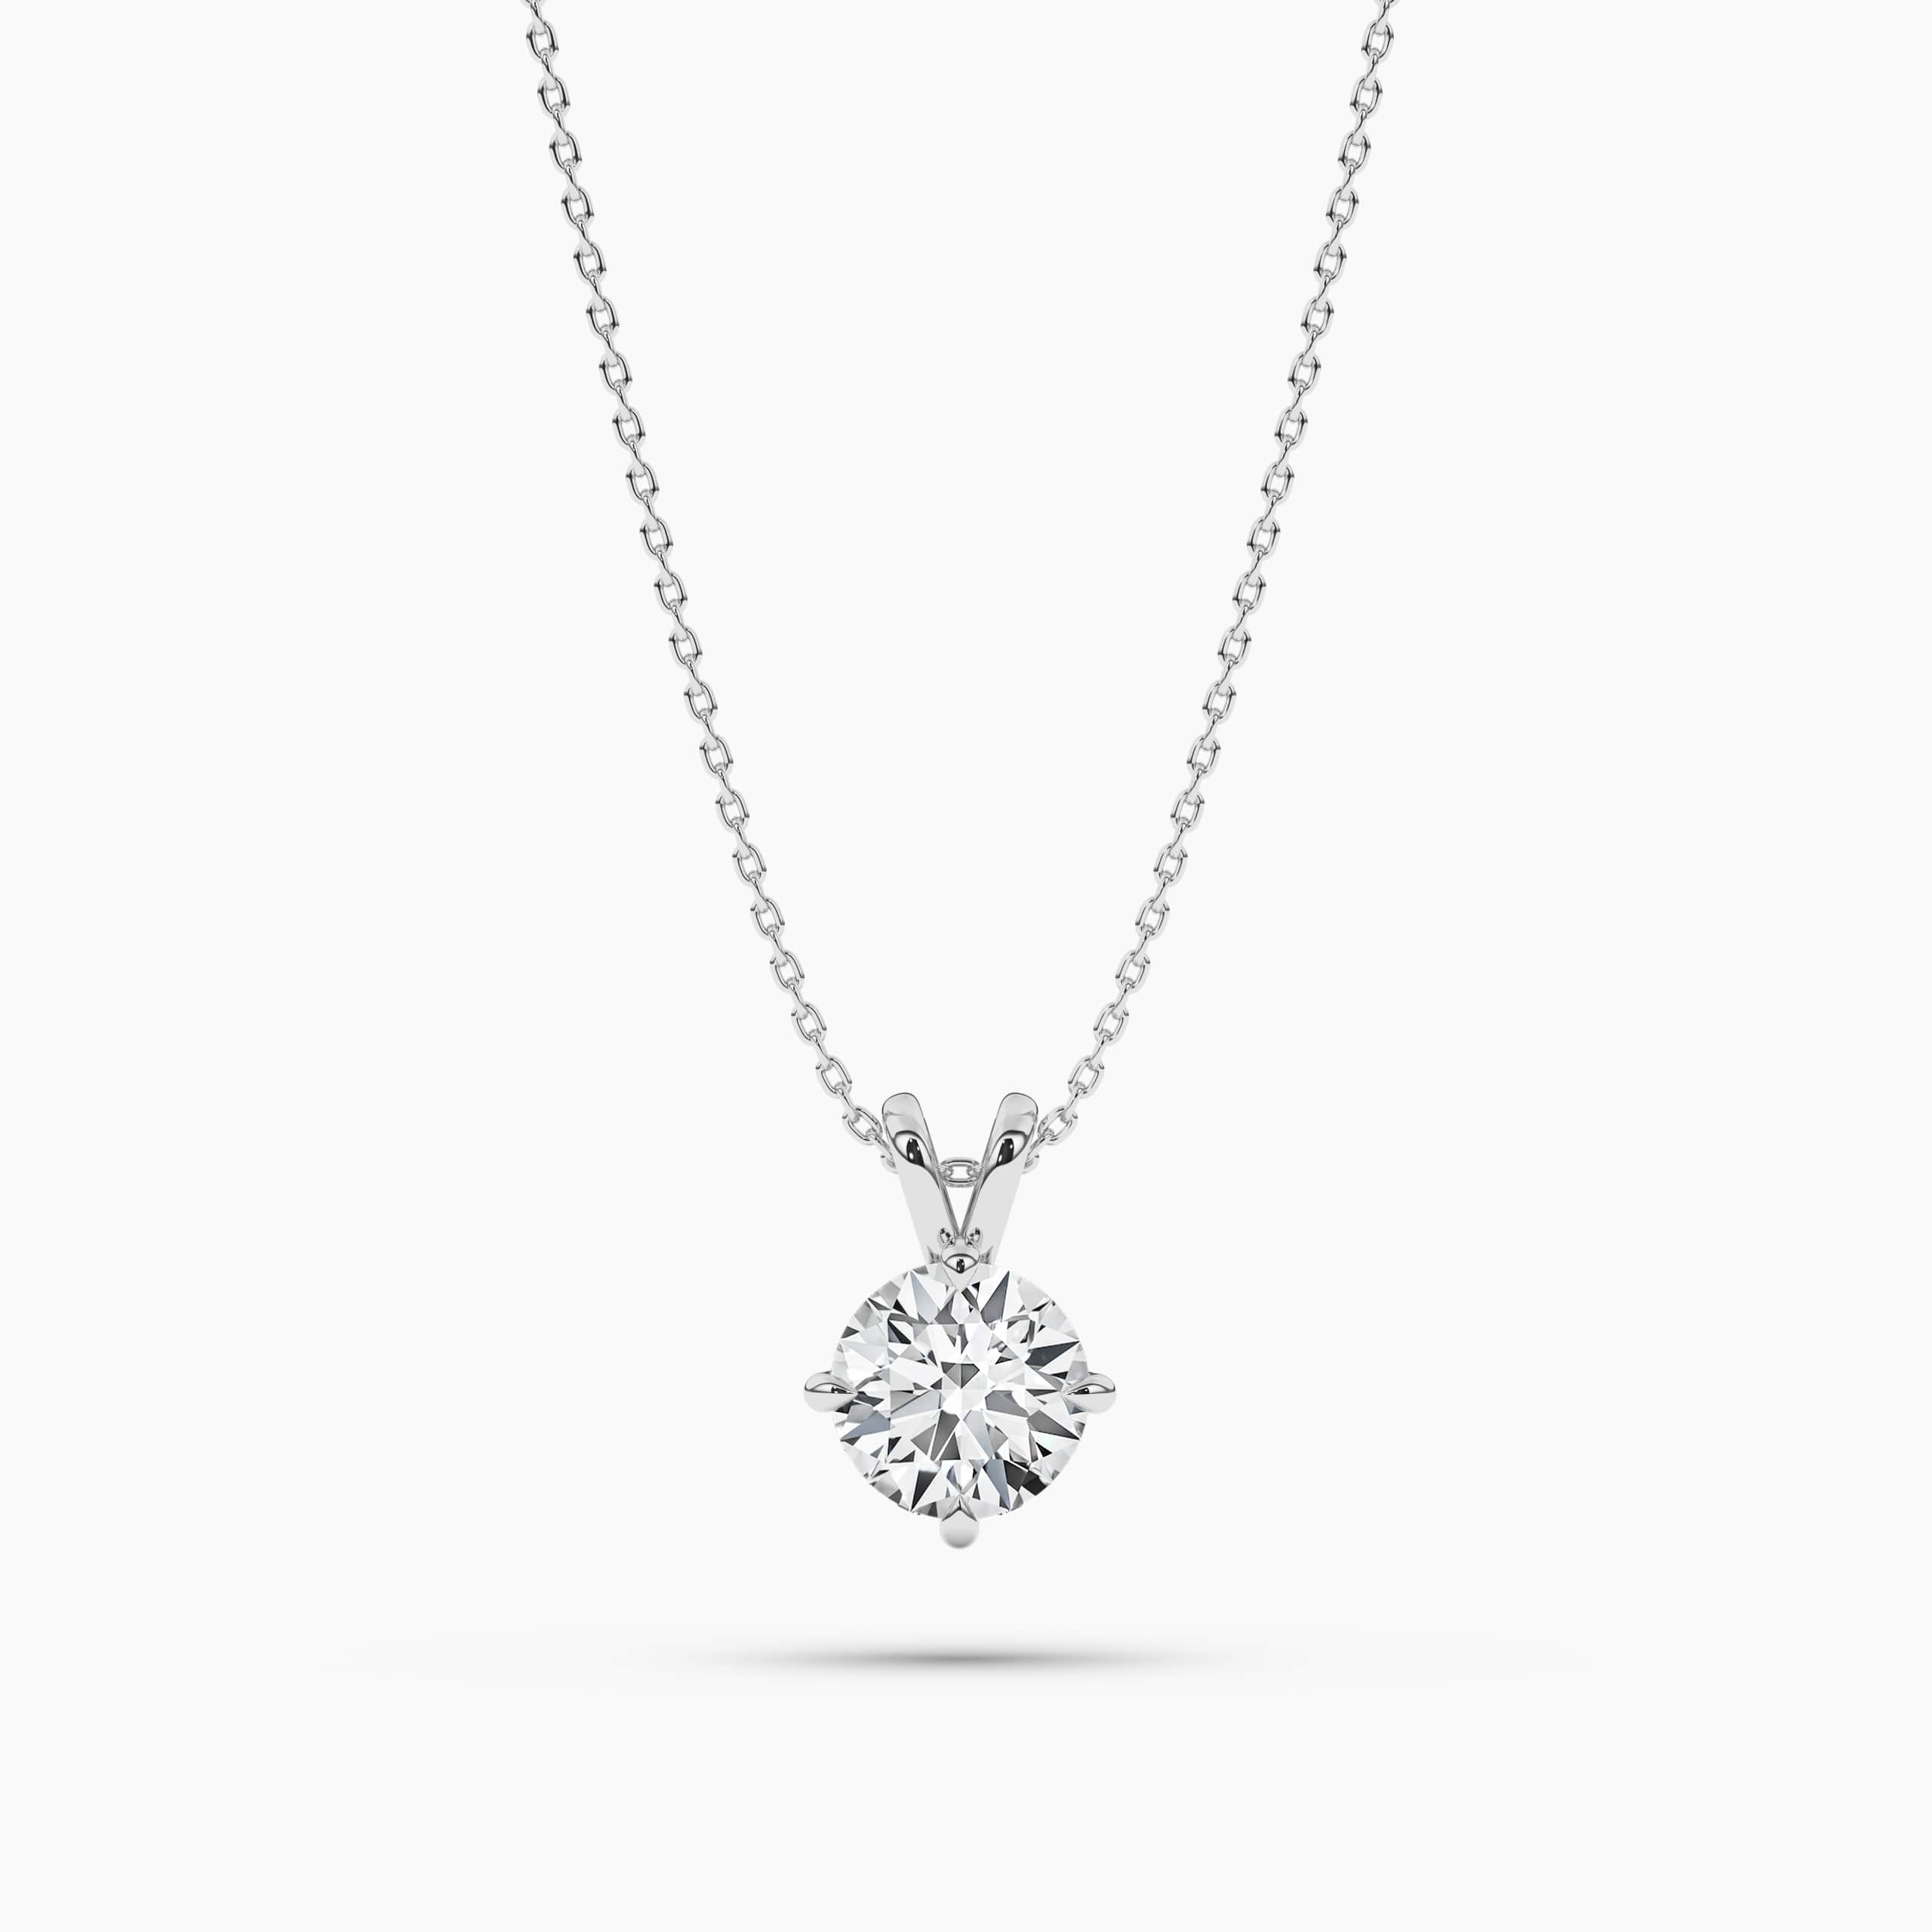 4-Prong Solitaire Diamond Necklace – White Gold